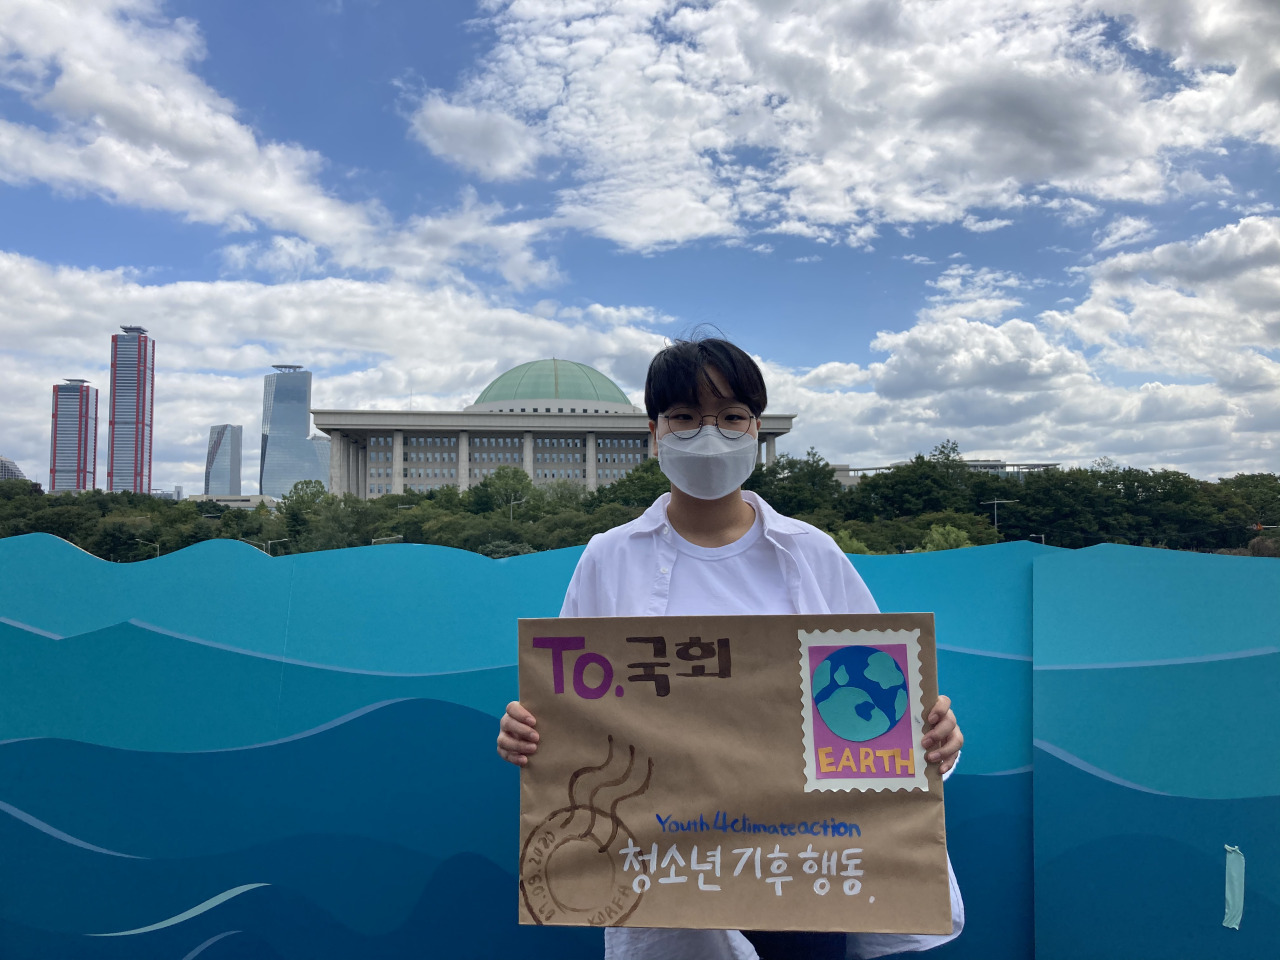 Teenage climate activist Yoon Hyeon-jeong poses for a photo in front of the National Assembly in Seoul while holding a placard urging lawmakers to take action on the climate crisis. (Yoon Hyeon-jeong)